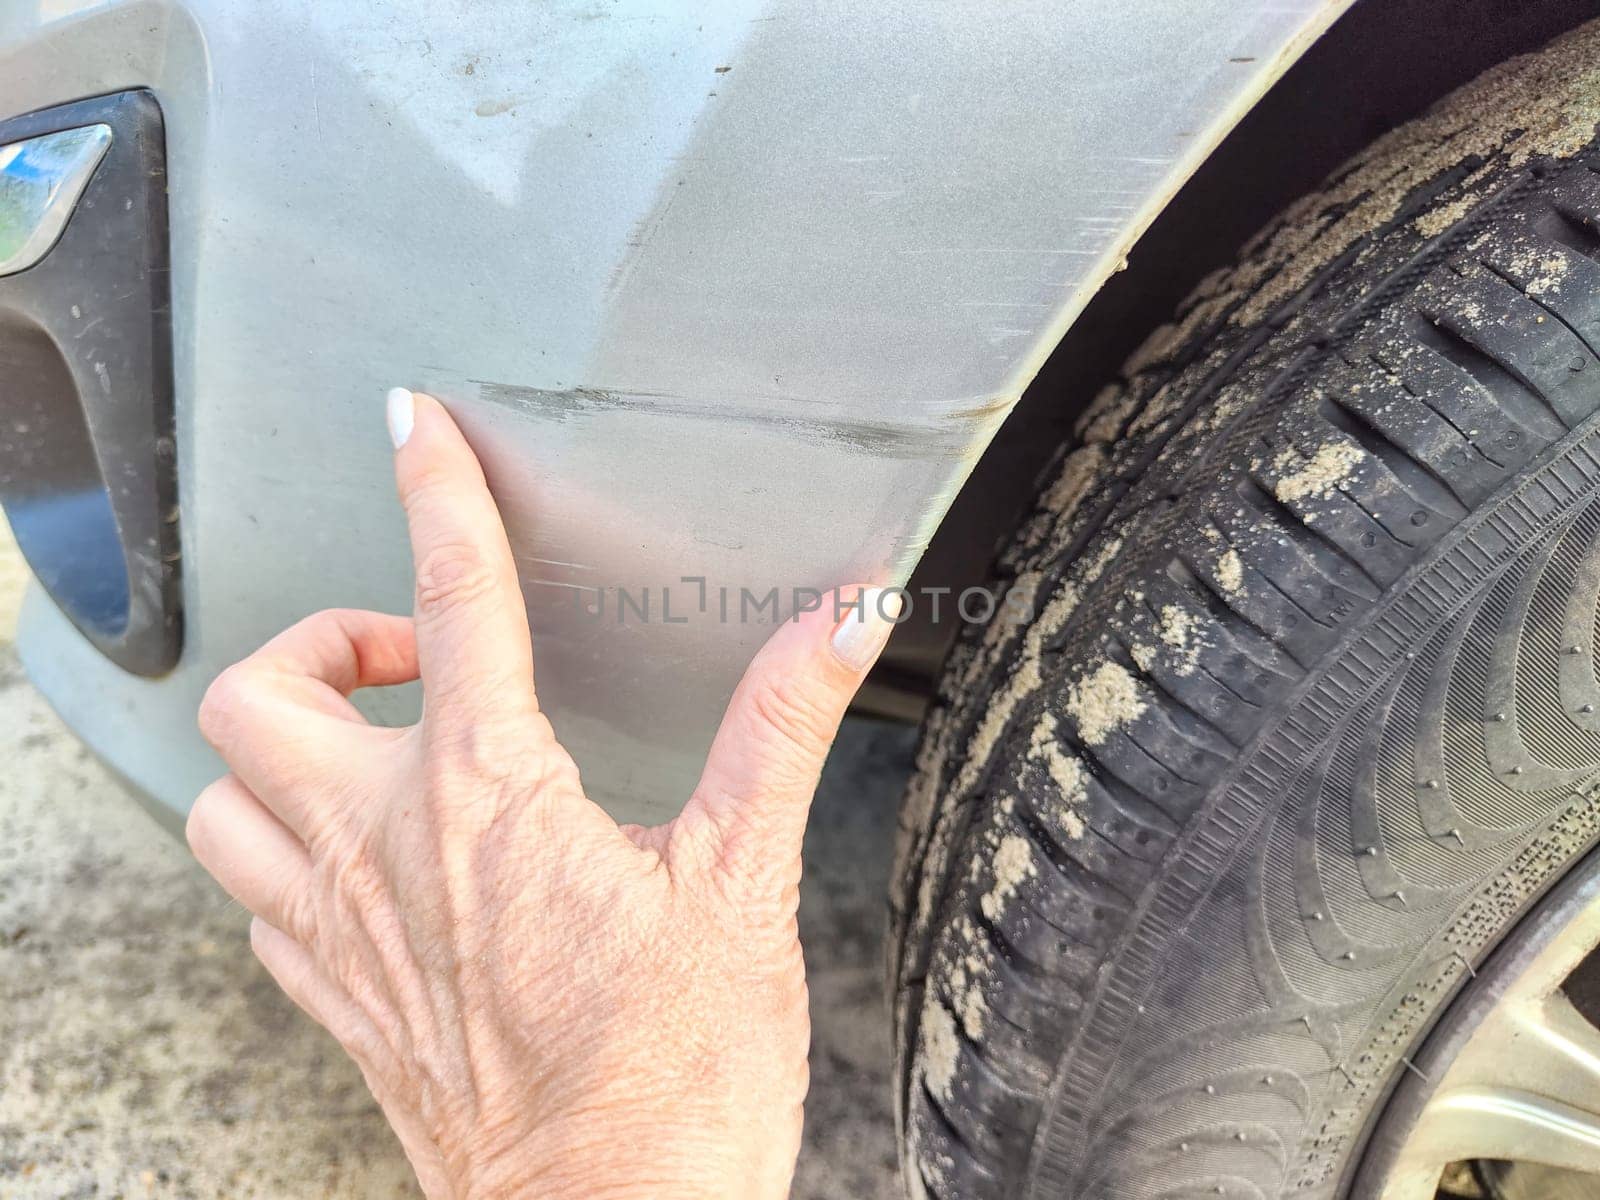 Finger indicating a scratch on a vehicles fender. Close-Up of Scratched Car Fender With Finger Pointing